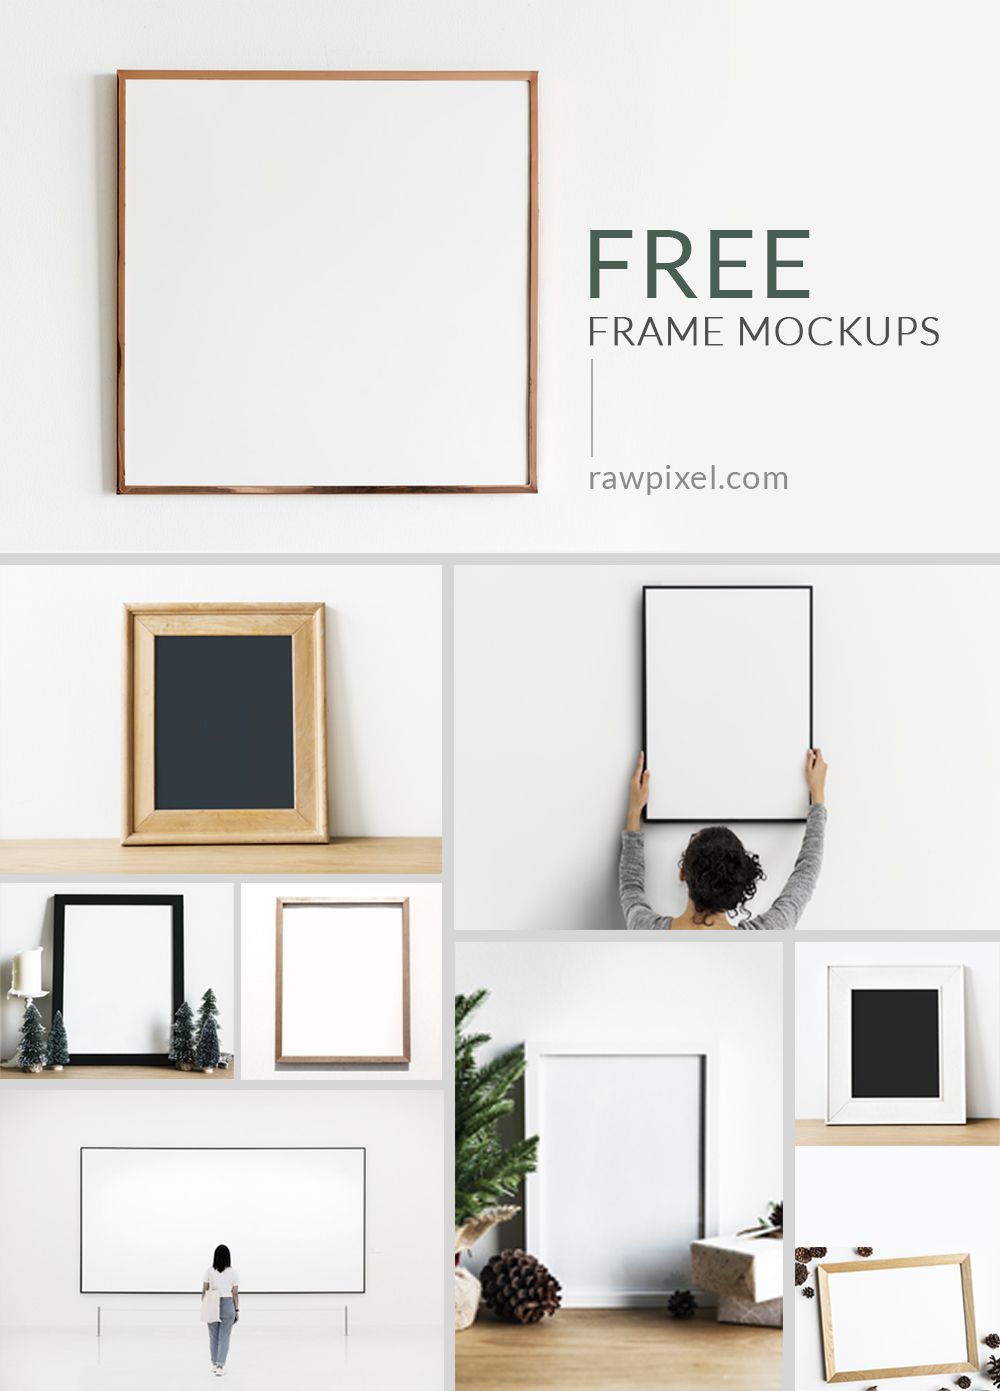 Download Beautiful Free And Premium Royalty Free Frame Mockups As Well As Other Mockups Of Laptops Phones I Frame Mockup Free Print Mockup Free Frame Mockups